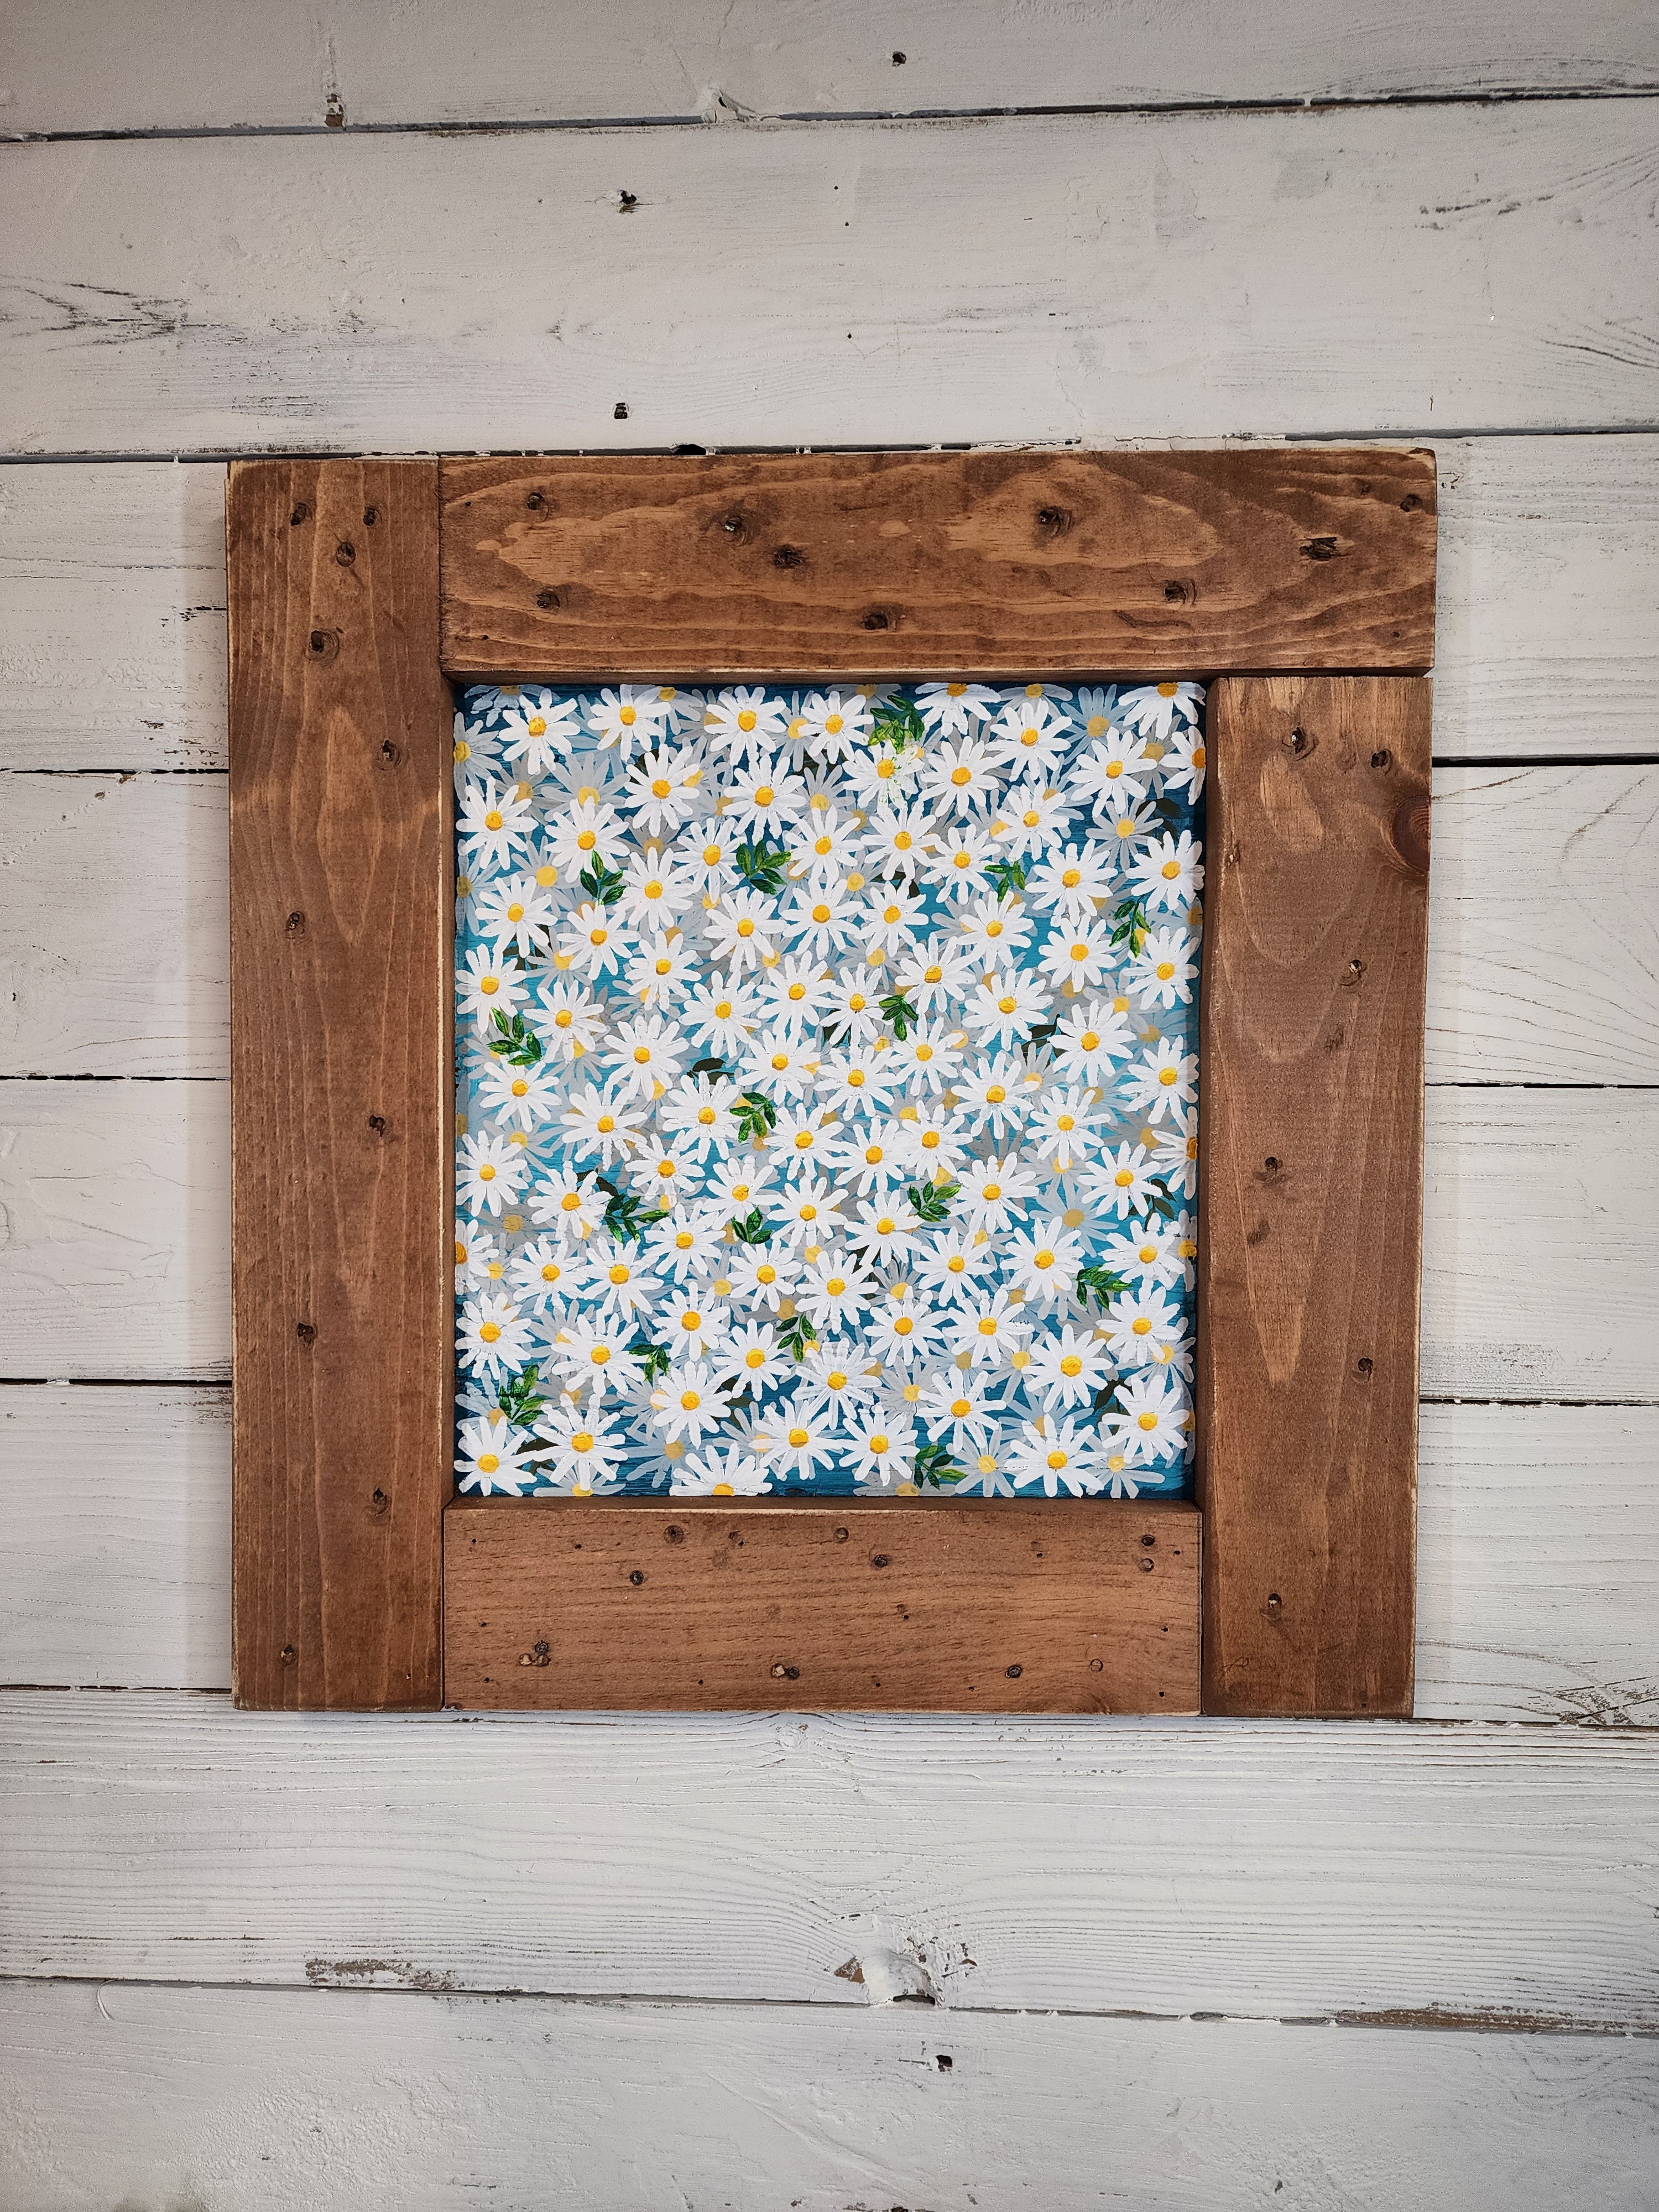 Acrylic floral daisy painting on pallet wood, daisy design on aqua and turquoise background, summer cottage and deck decor artwork,